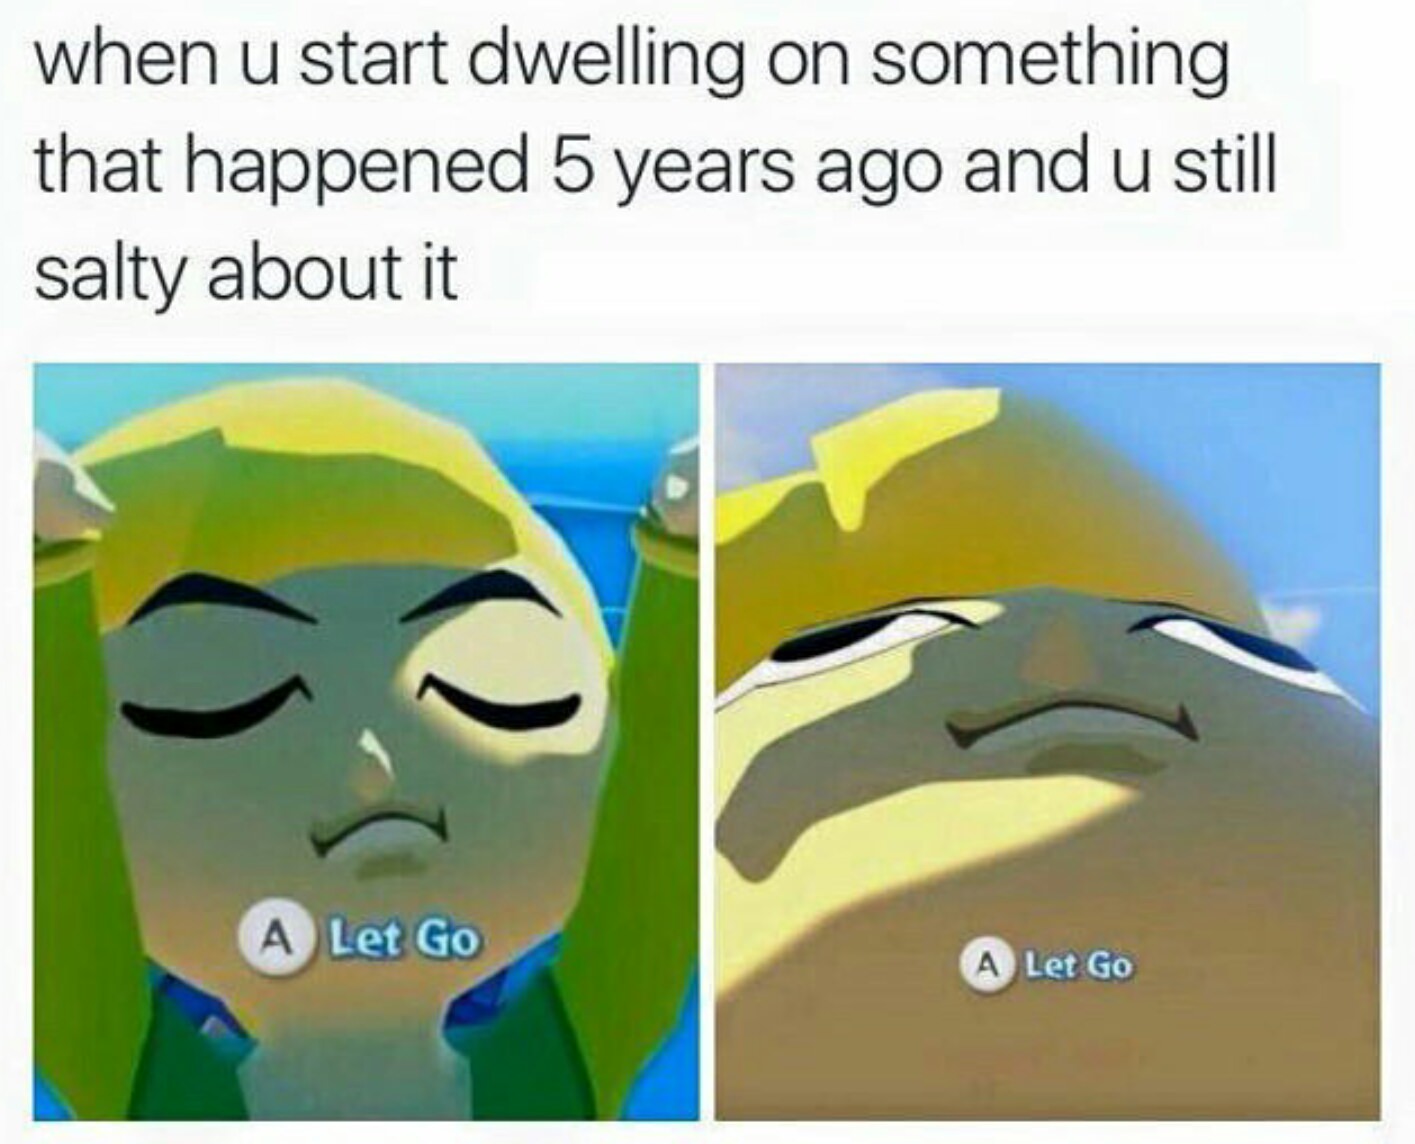 wind waker memes - when u start dwelling on something that happened 5 years ago and u still salty about it A Let Go A Let Go